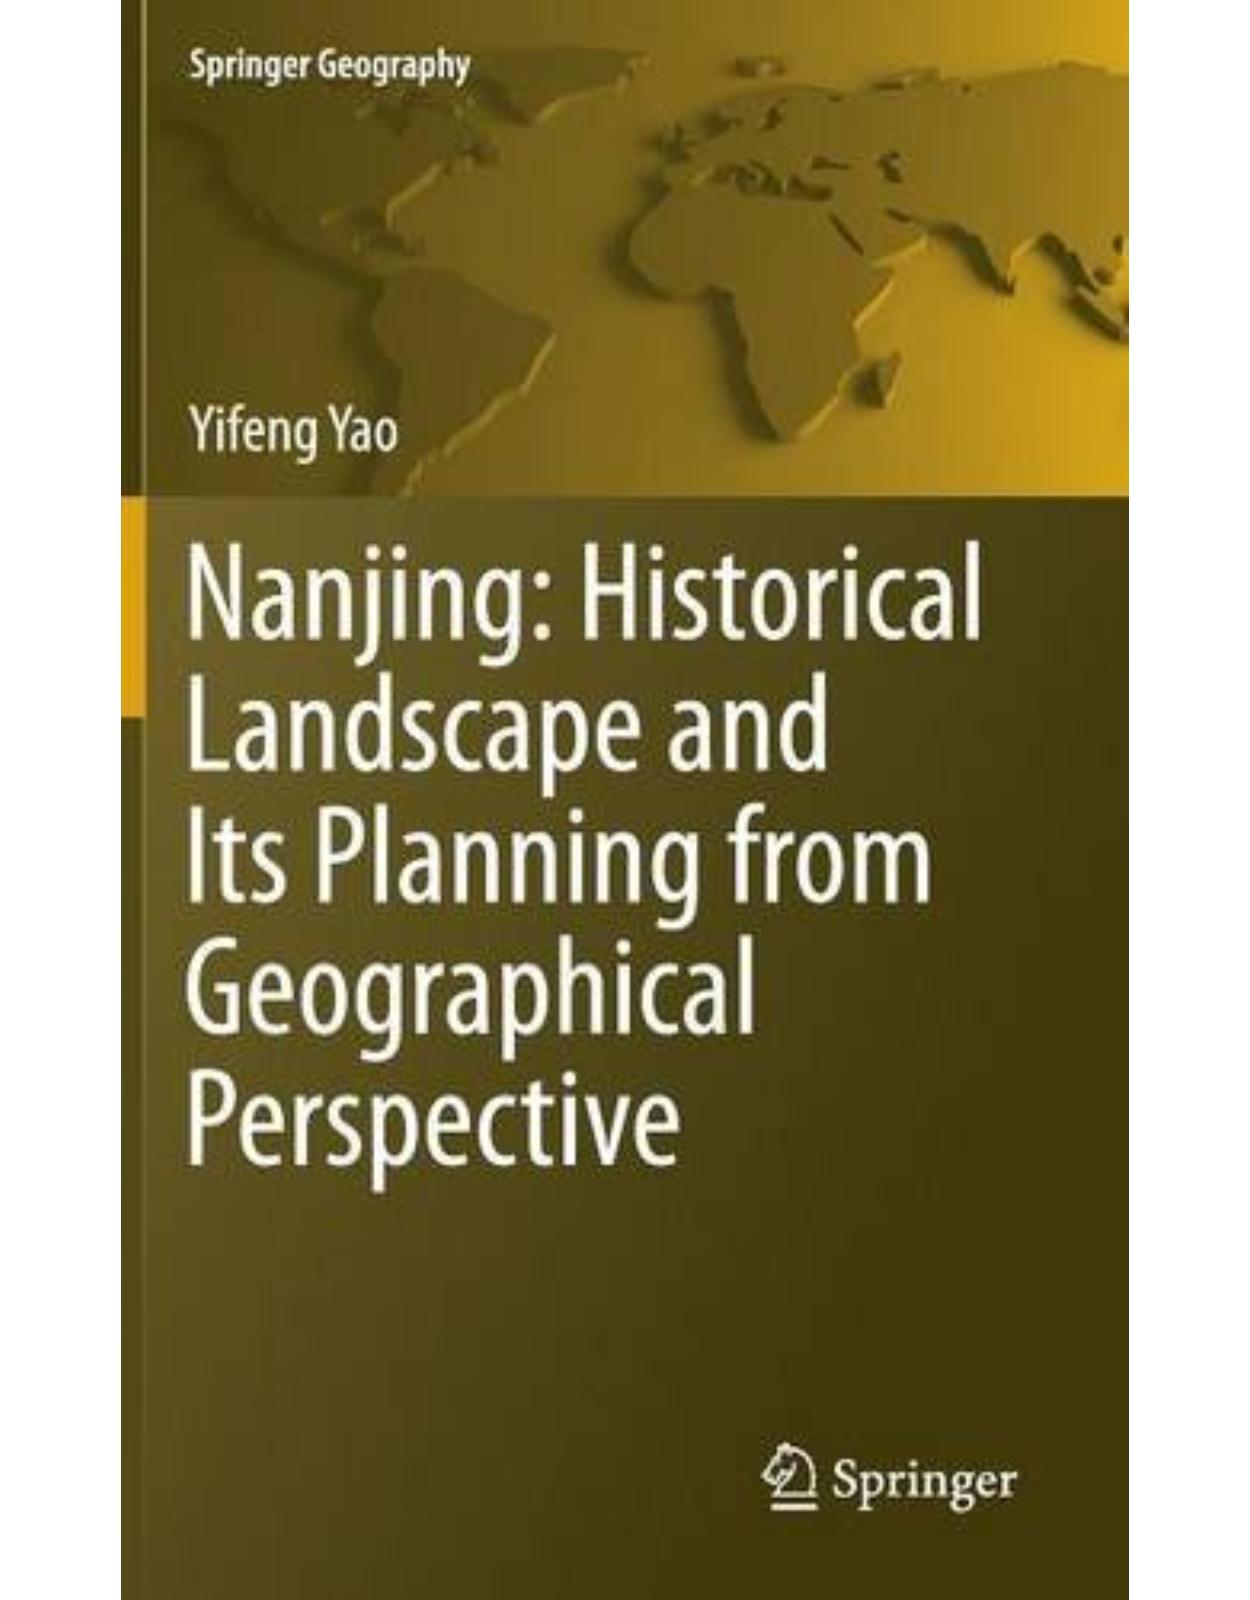 Nanjing: Historical Landscape and Its Planning from Geographical Perspective